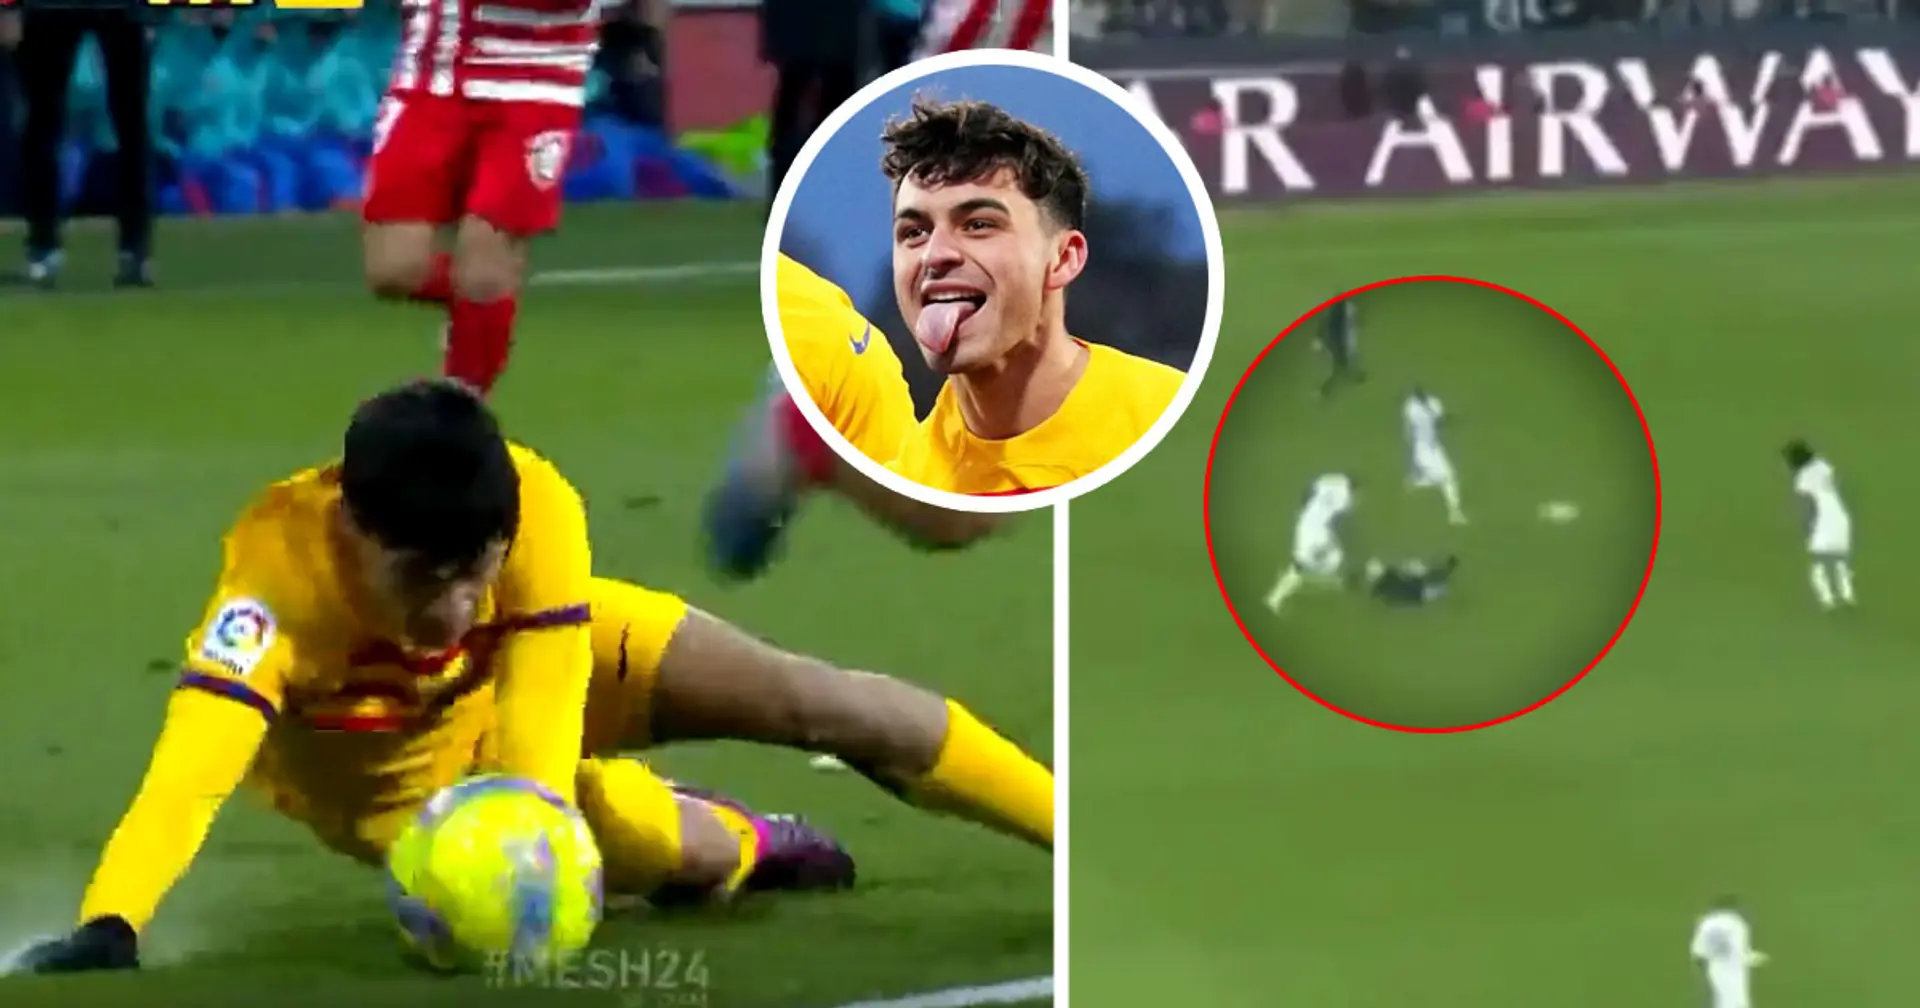 Spotted: Pedri performs Messi-like skill in Girona game